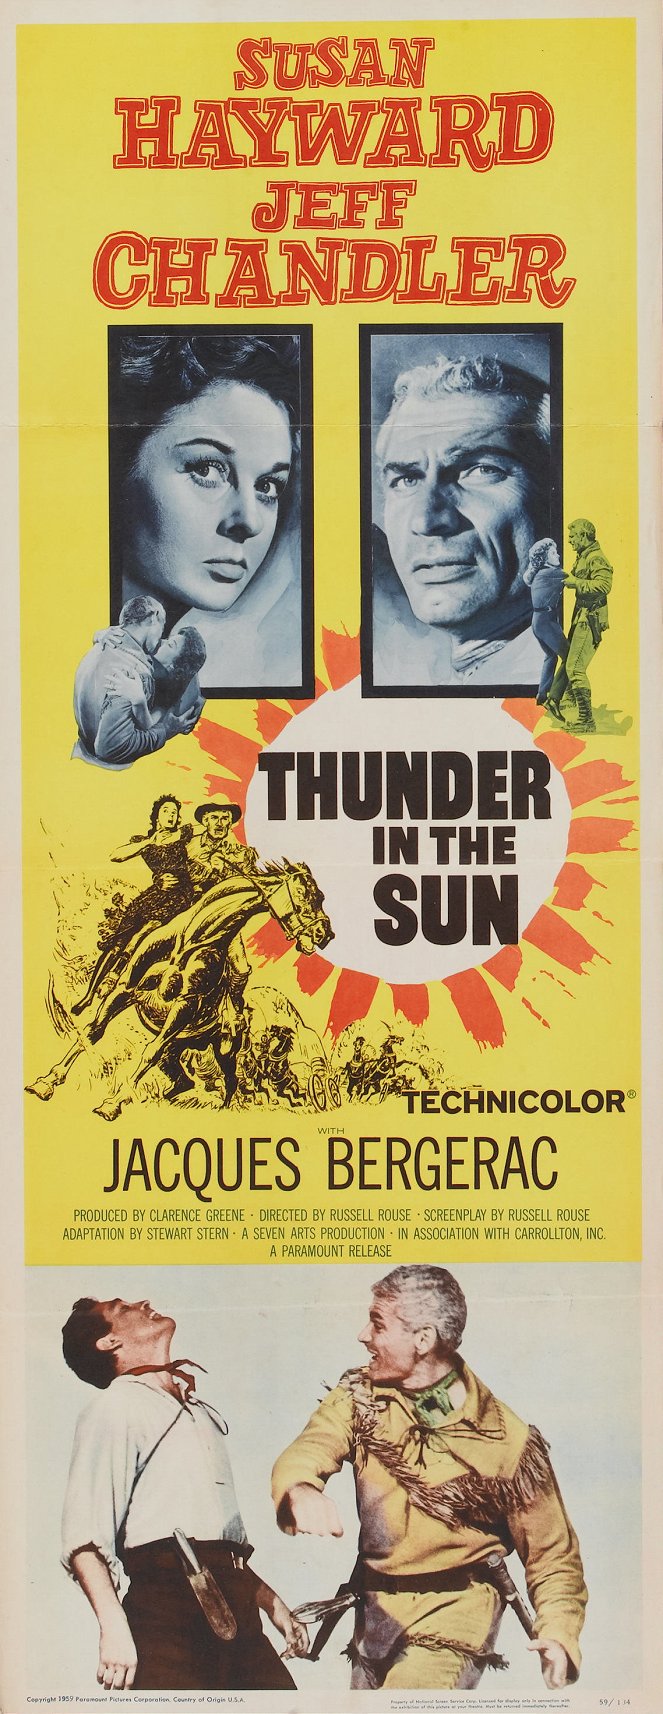 Thunder in the Sun - Posters